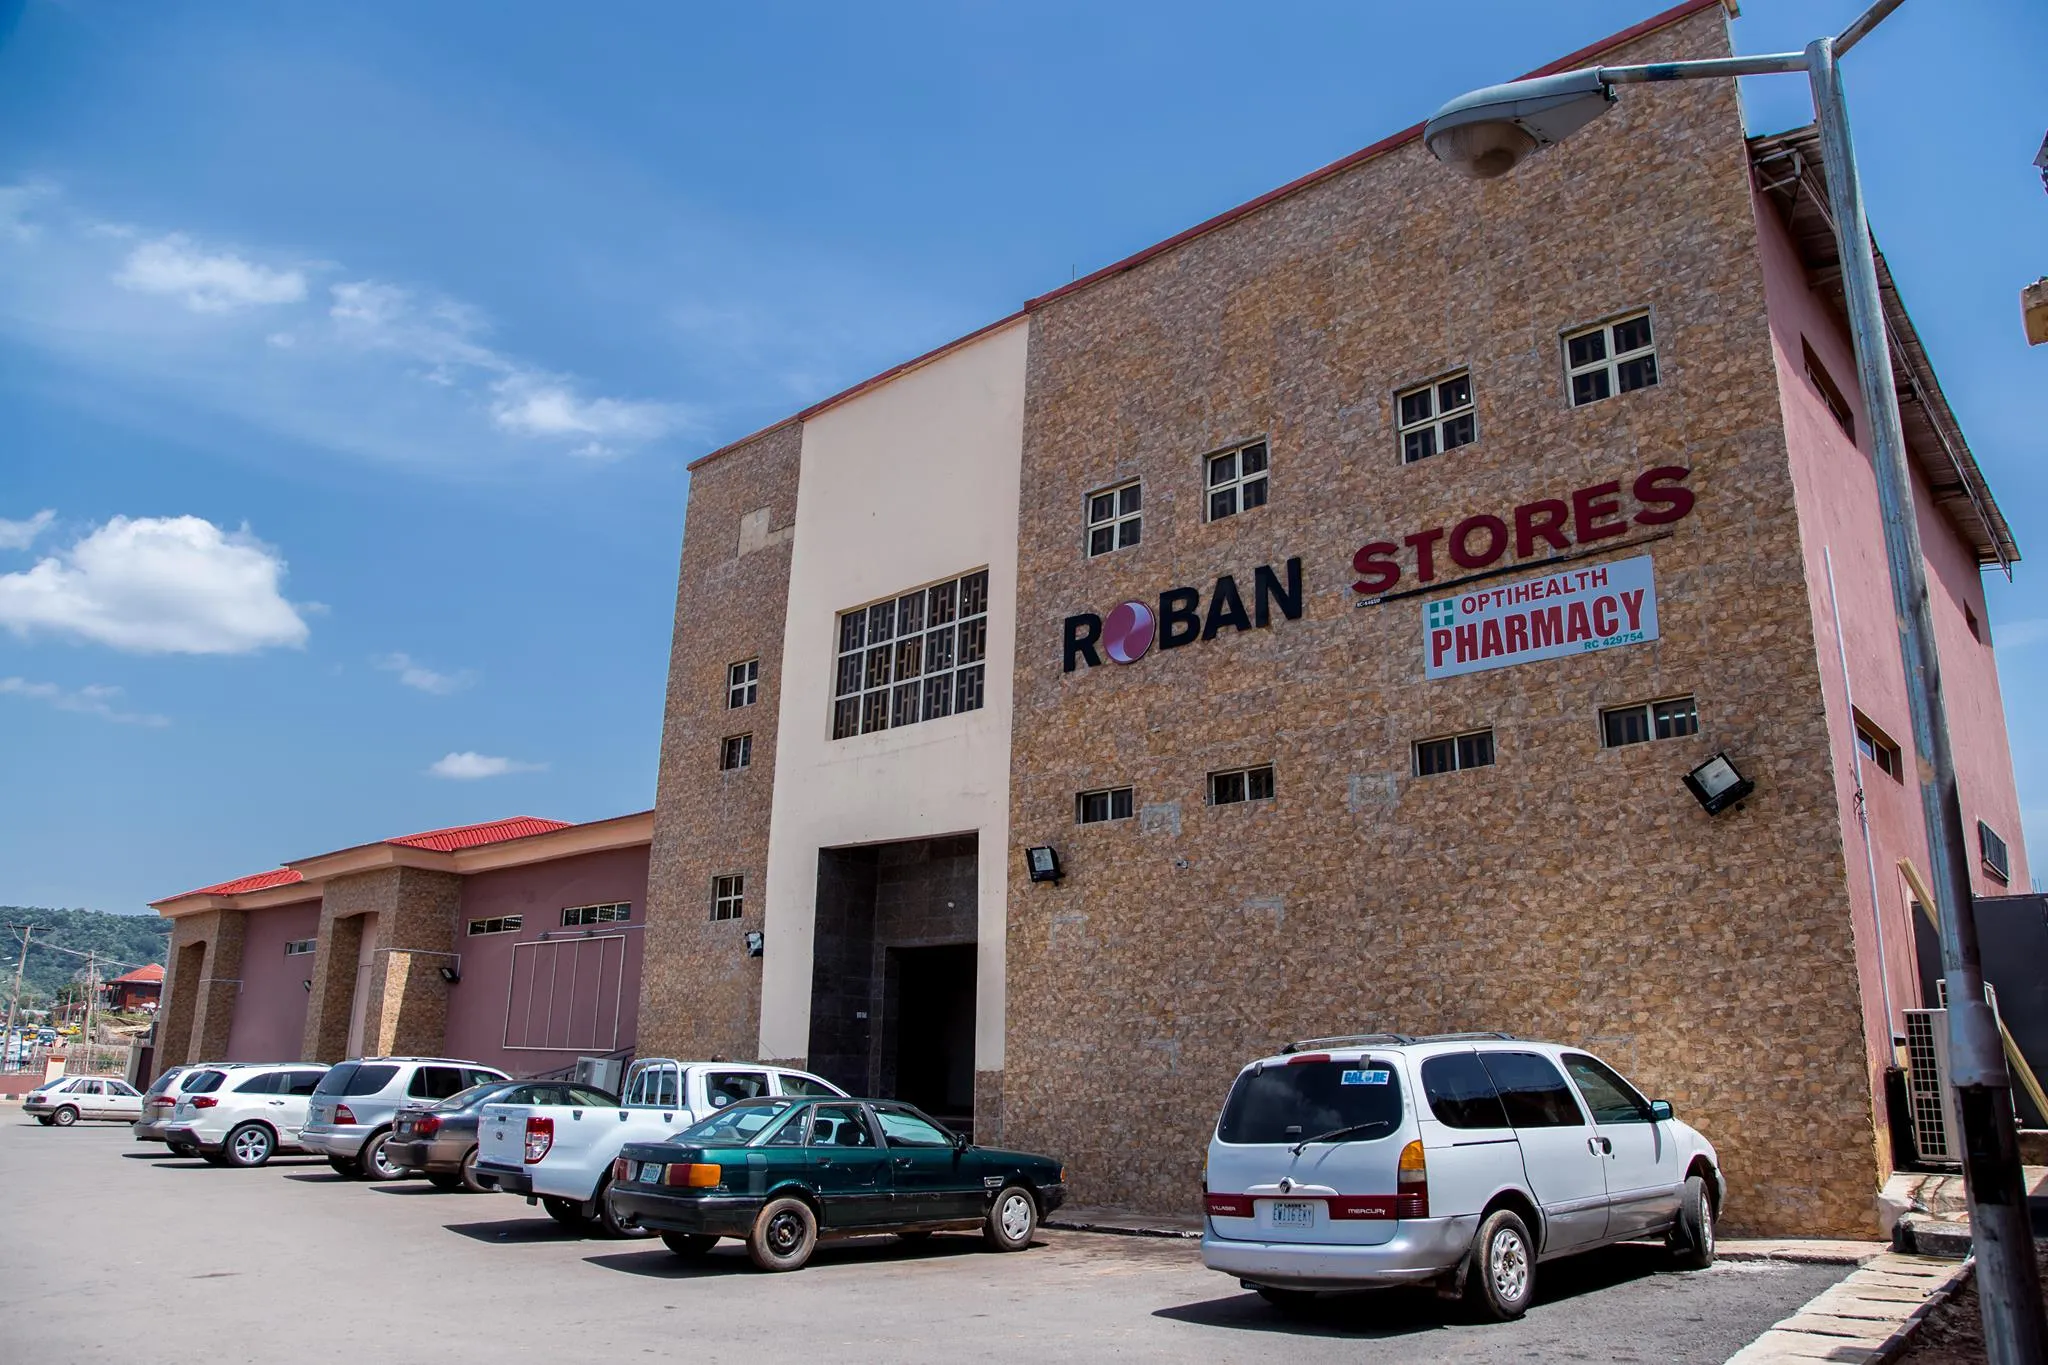 Roban Stores in Nigeria, africa | Spices,Organic Food,Dairy,Groceries,Seafood,Fruit & Vegetable,Meat - Country Helper